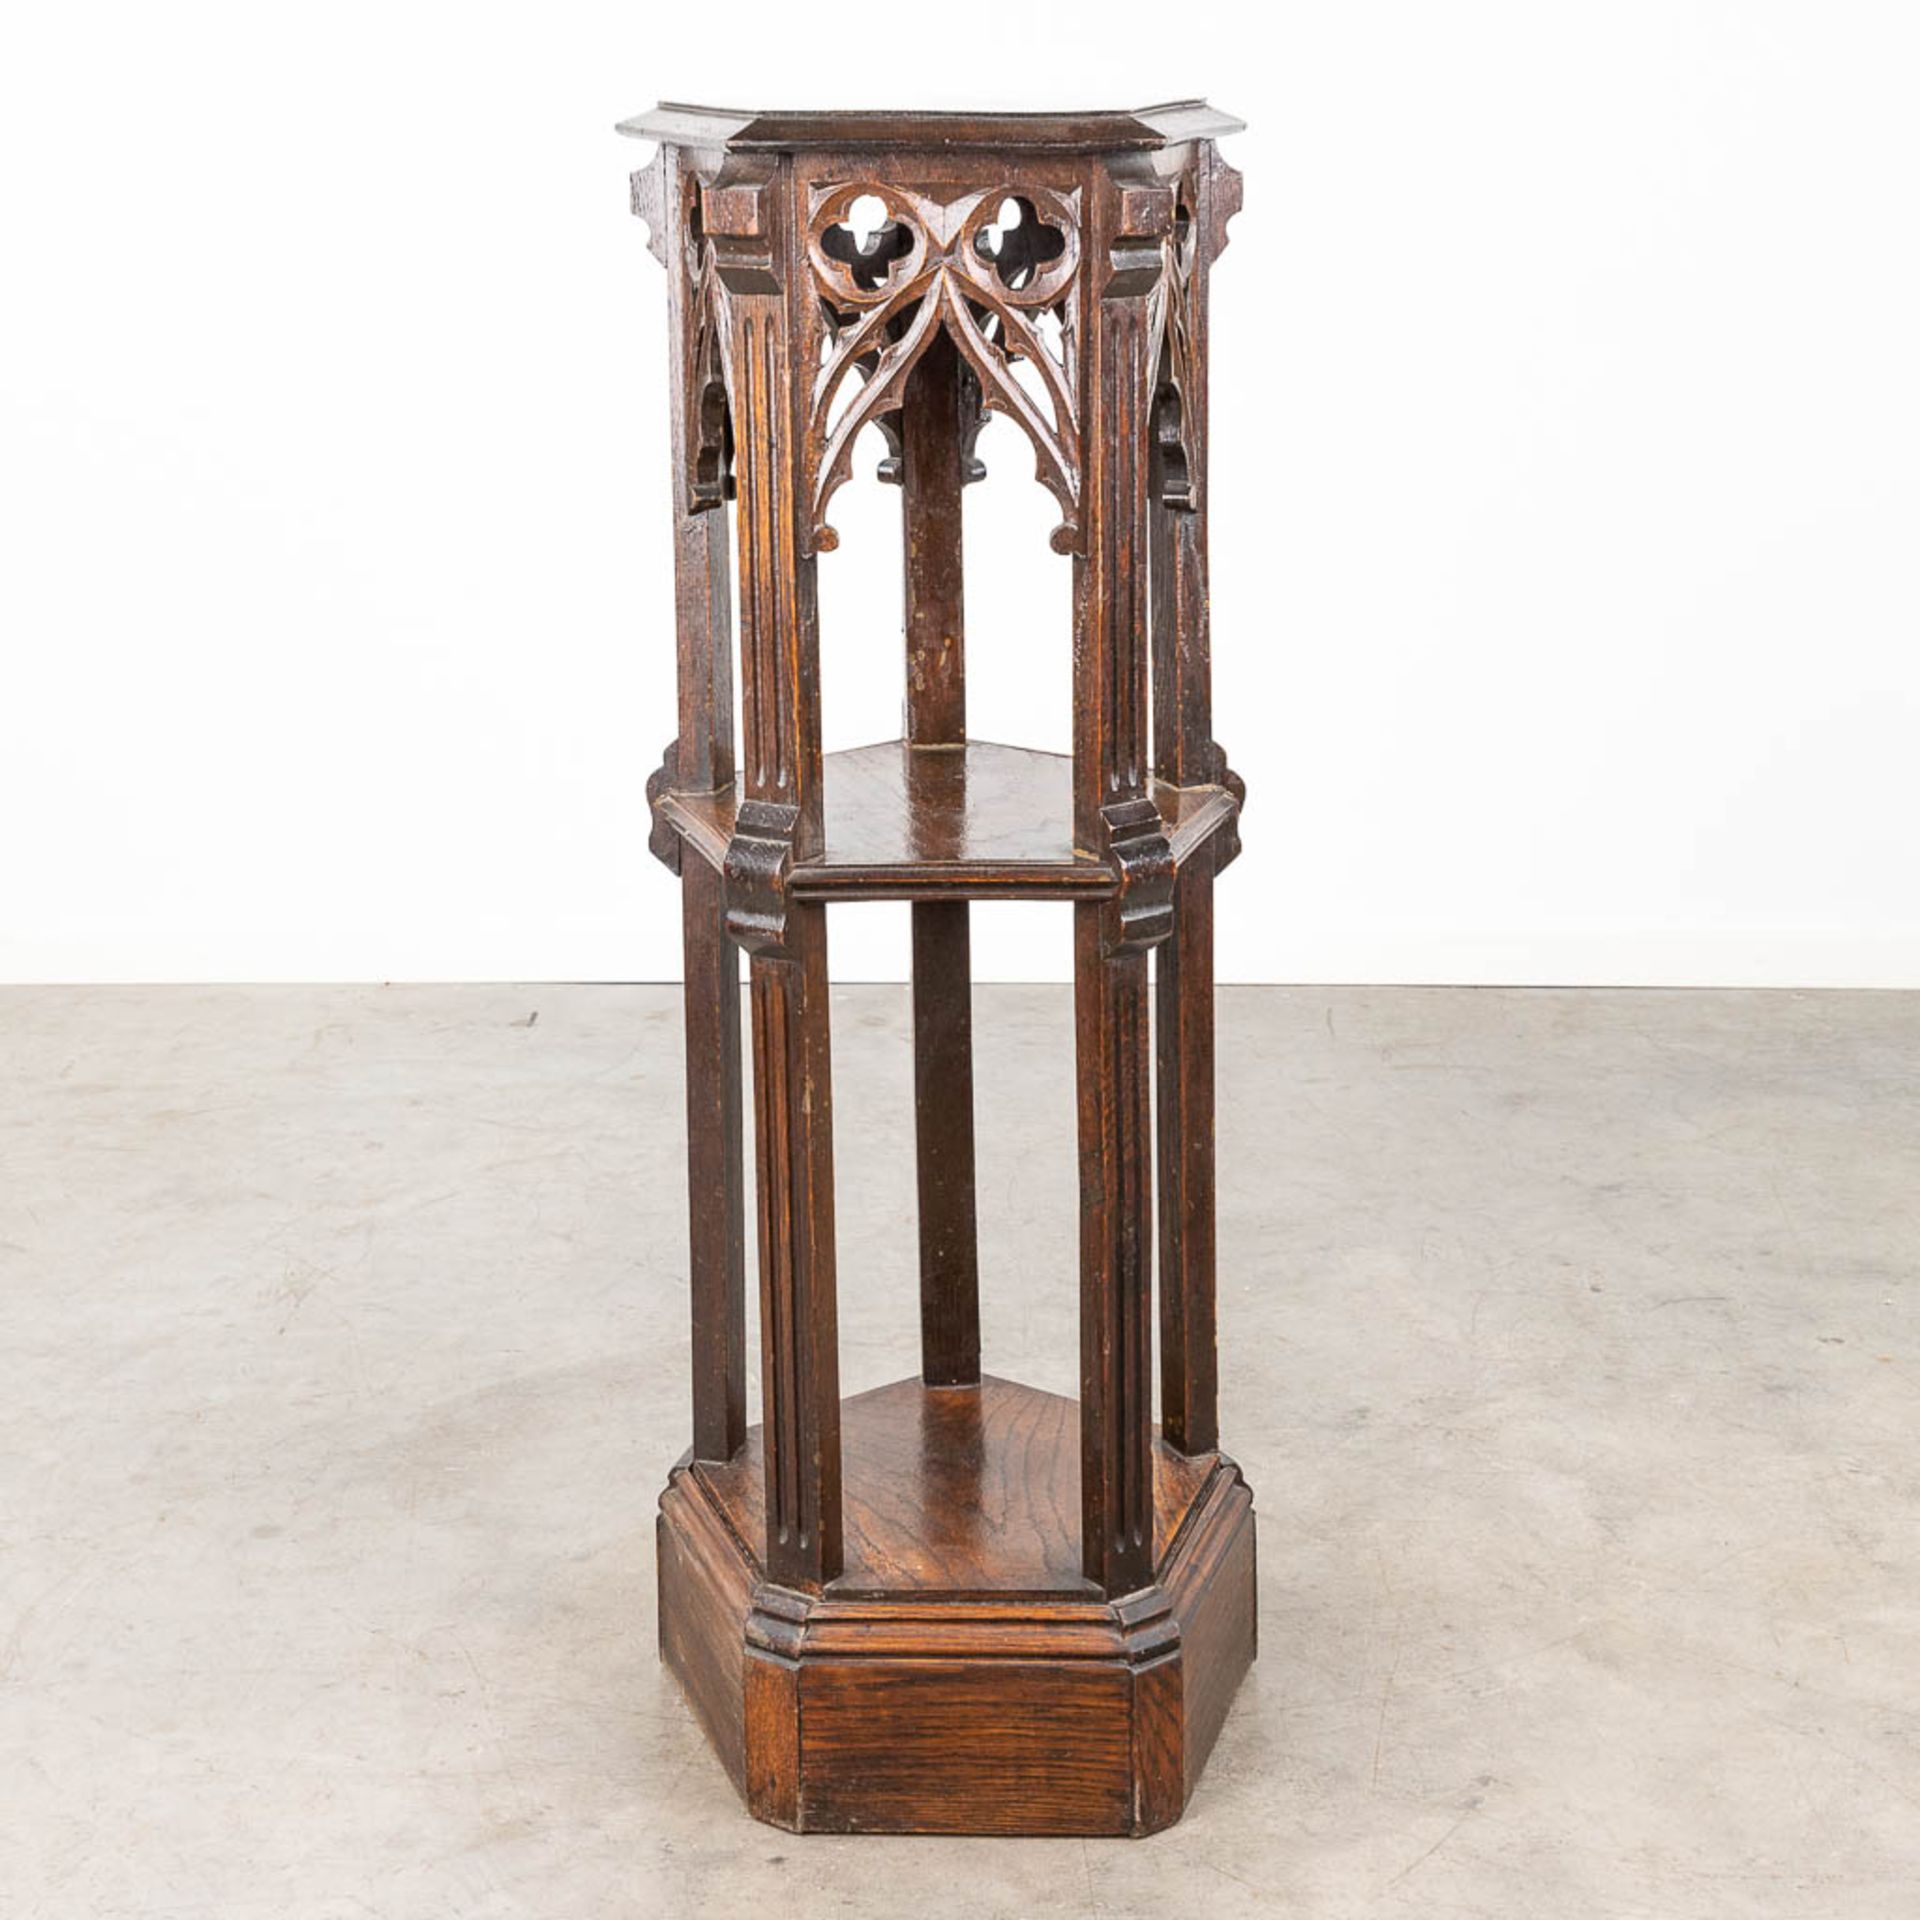 A pentagram pedestal, sculptured wood in Gothic Revival style. 19th C. (L: 41 x W: 46 x H: 111 cm) - Image 4 of 12